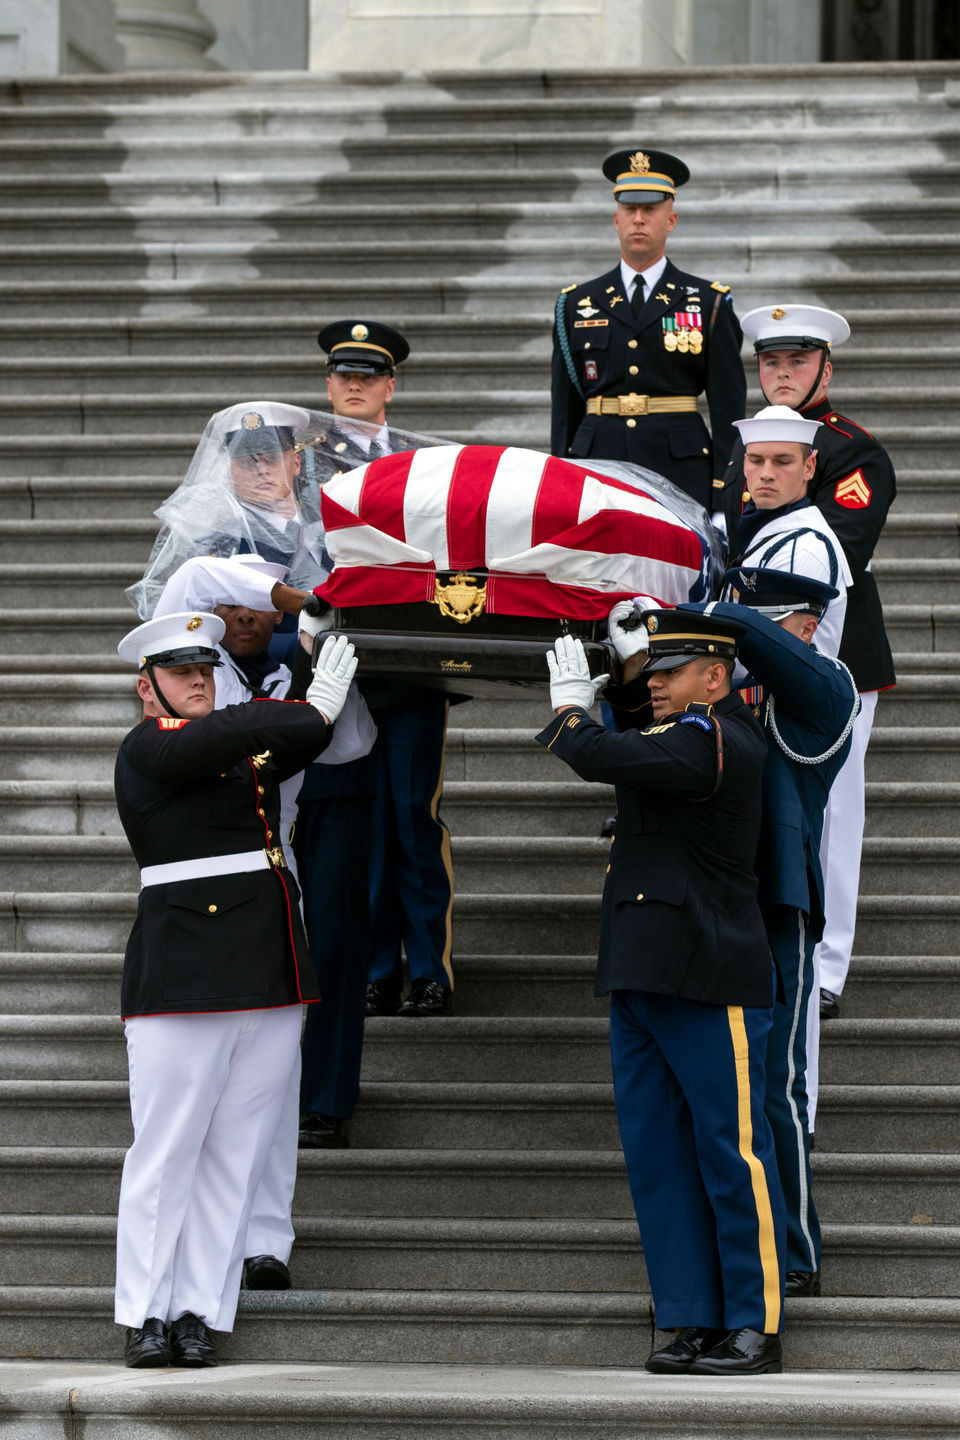 McCain The casket of Sen. John McCain, R-Ariz., is carried to a hearse from the U.S. Capitol in Washington, Saturday, Sept. 1, 2018, in Washington, for a departure to the Washington National Cathedral for a memorial service. (Jim Lo Scalzo/Pool Photo via AP)